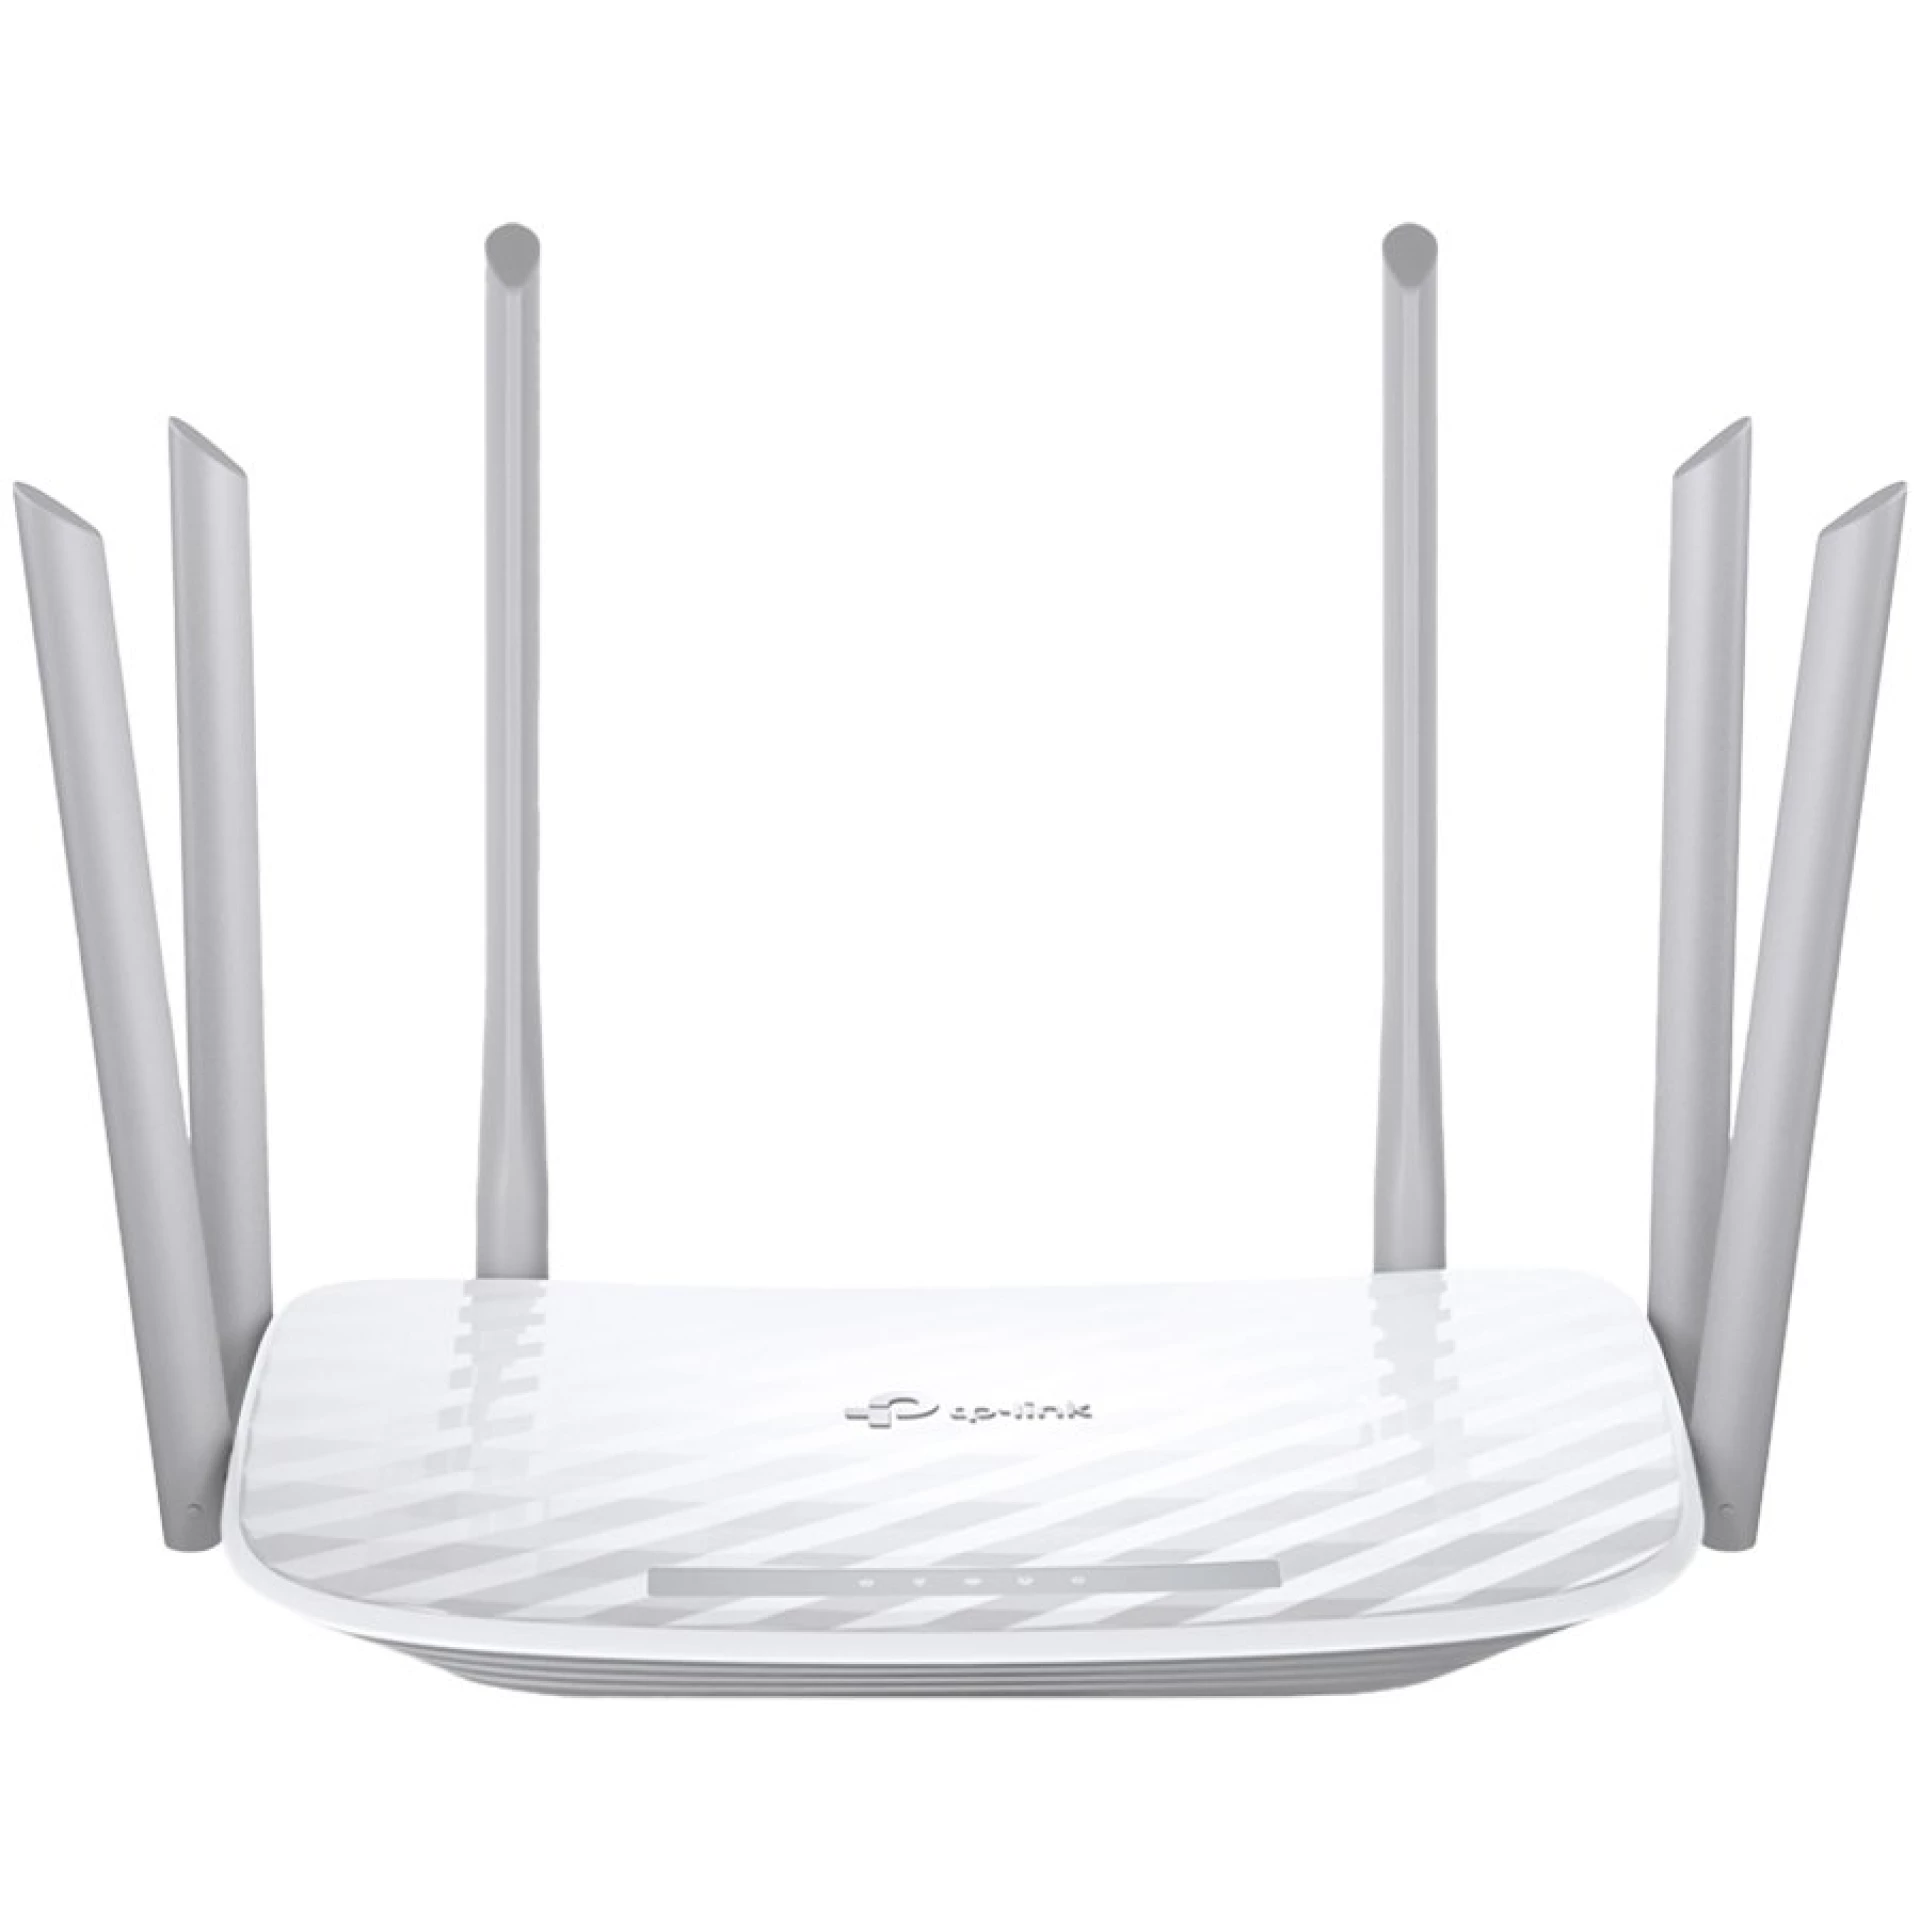 TP-Link Archer C86 AC1900 Wireless MU-MIMO Wi-Fi Router, 802.11ac Wave2 Wi-Fi – 1300 Mbps on the 5 GHz band and 600 Mbps on the 2.4 GHz band, 3x3 MIMO, 1 x G WAN port, 4 x G LAN port, 6 x High-Performance Antennas, Beamforming, Router/AP mode